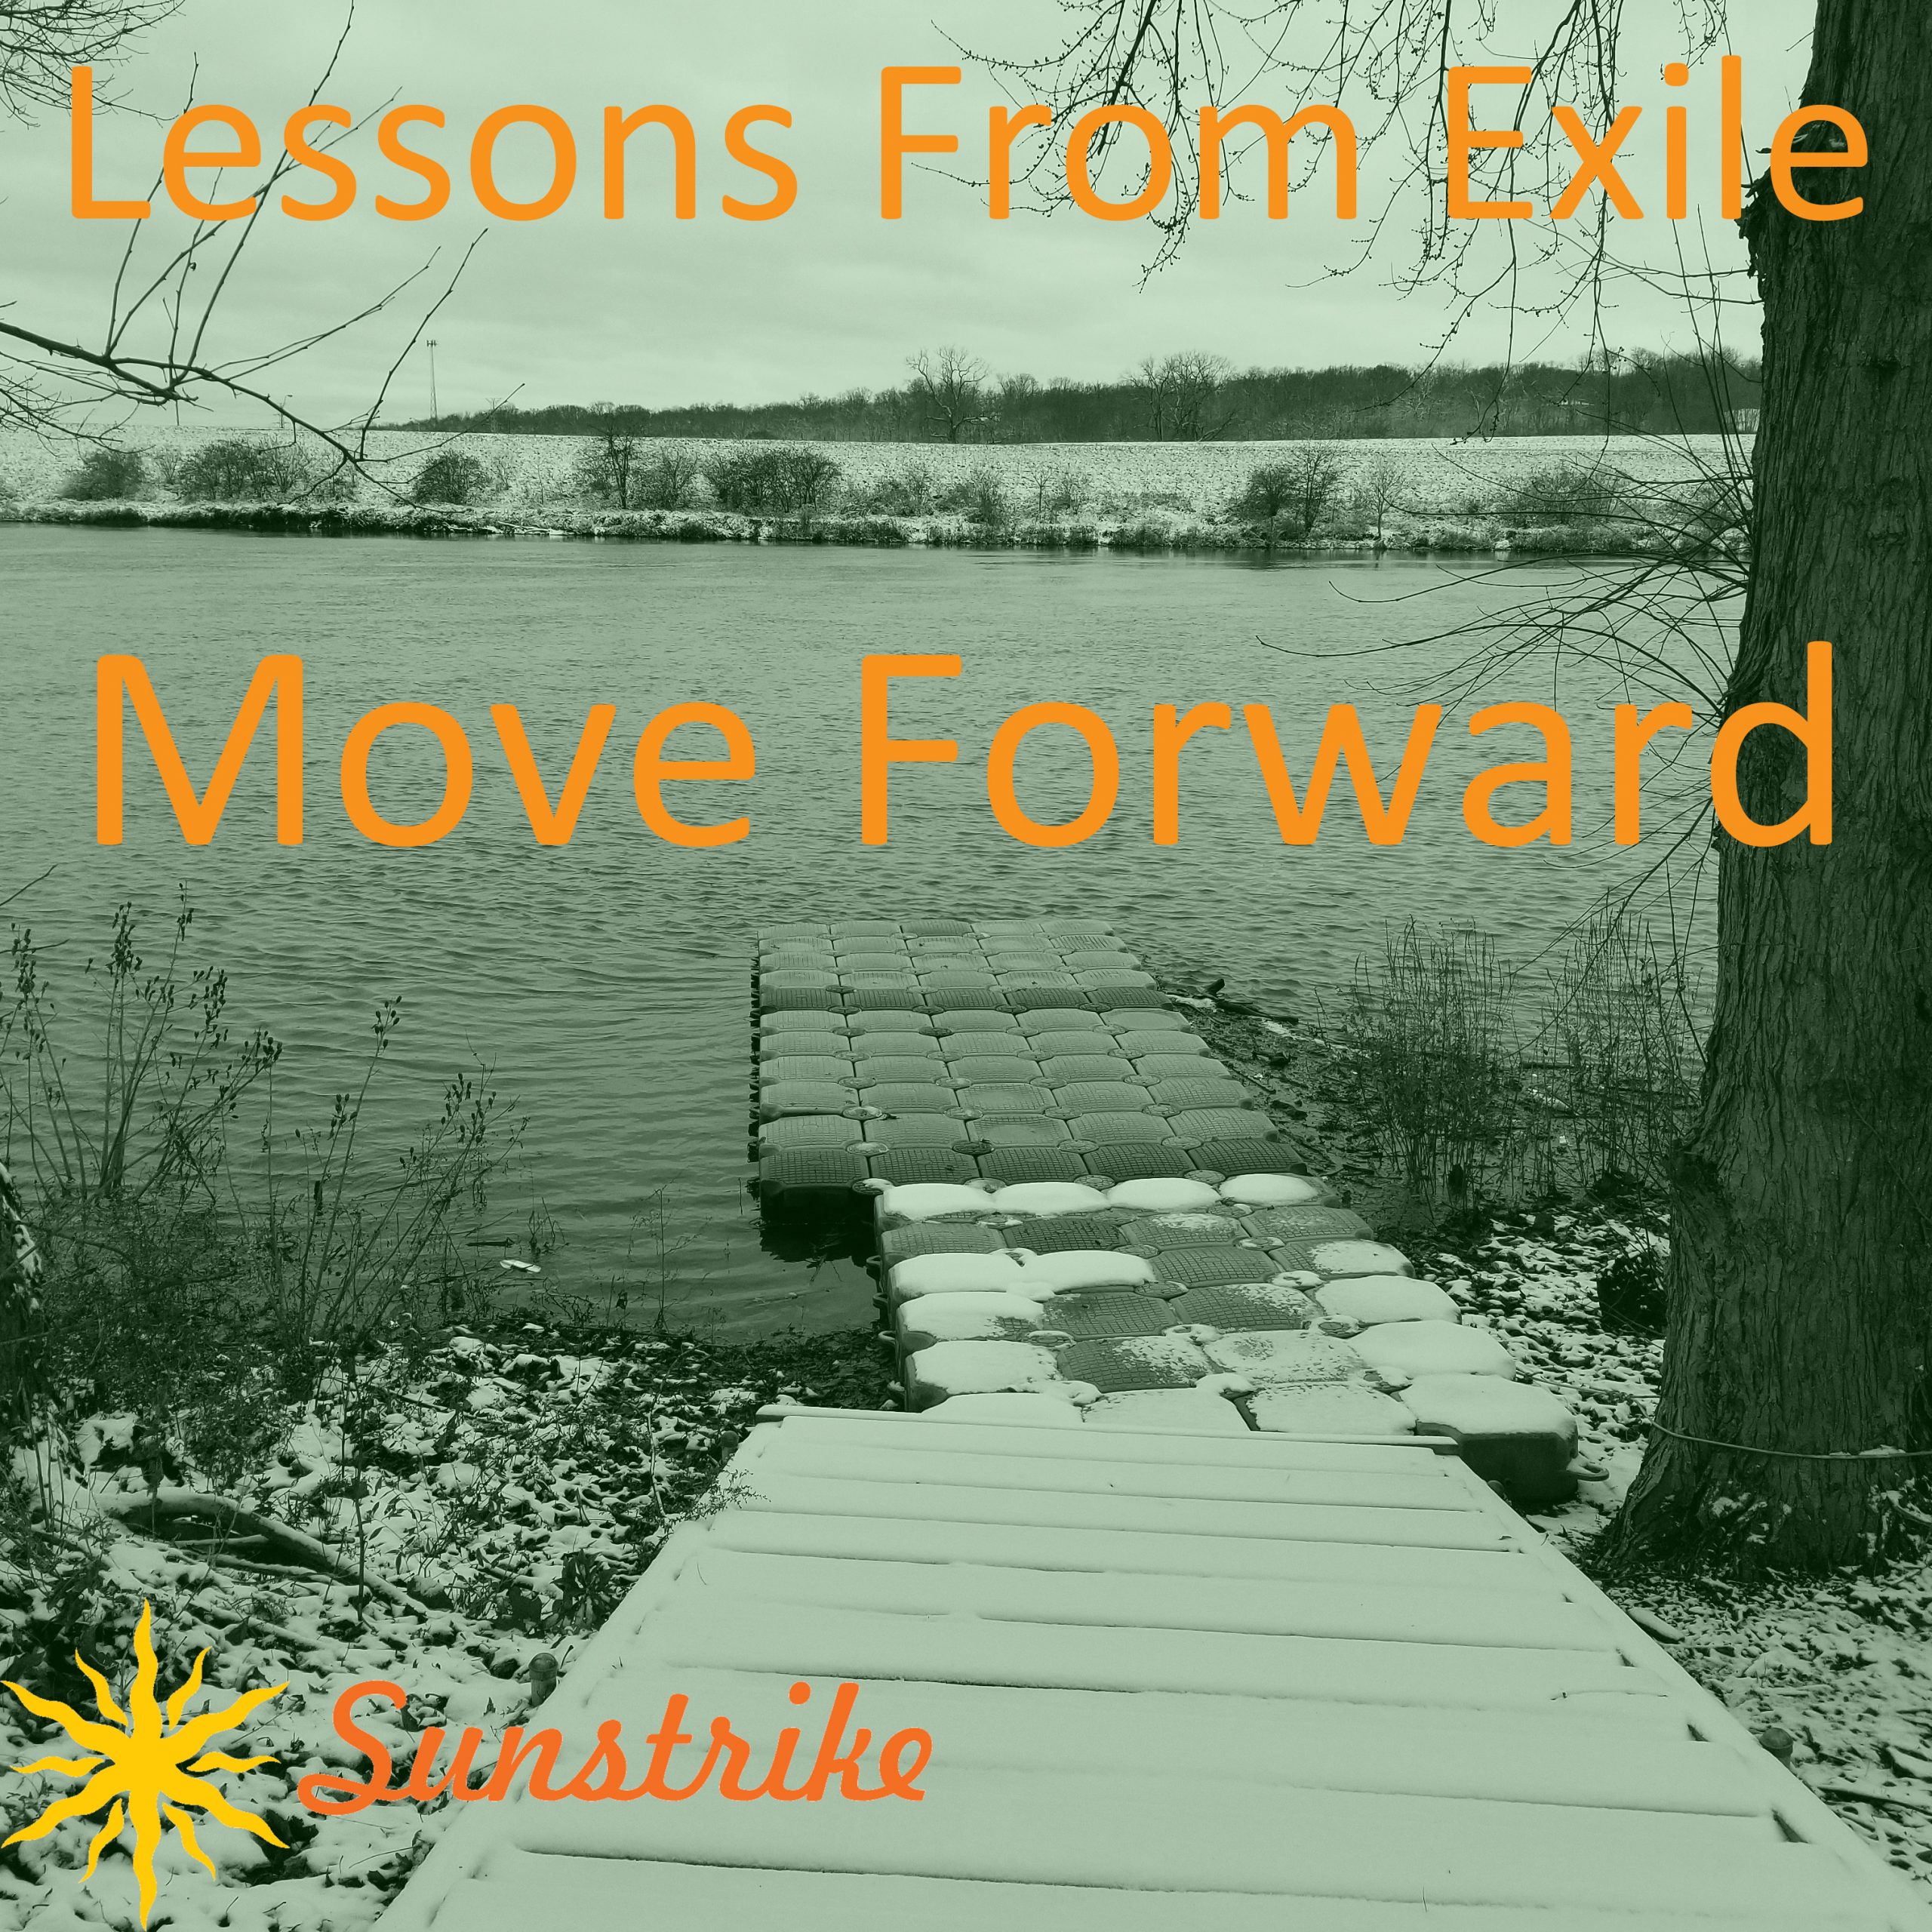 Lessons from Exile #95: Move Forward